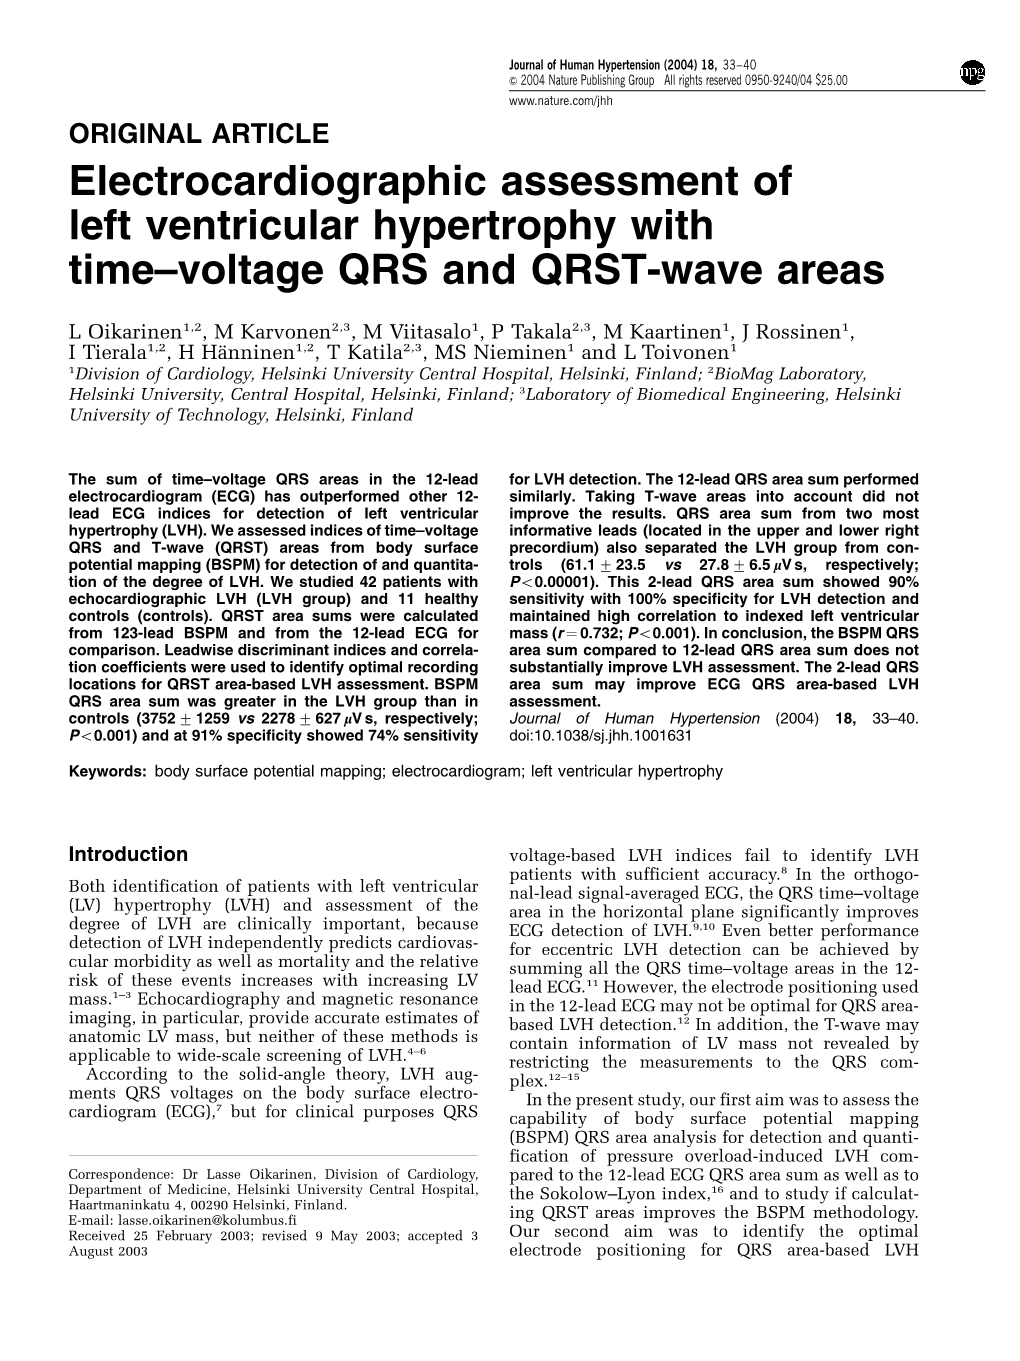 Electrocardiographic Assessment of Left Ventricular Hypertrophy with Time–Voltage QRS and QRST-Wave Areas